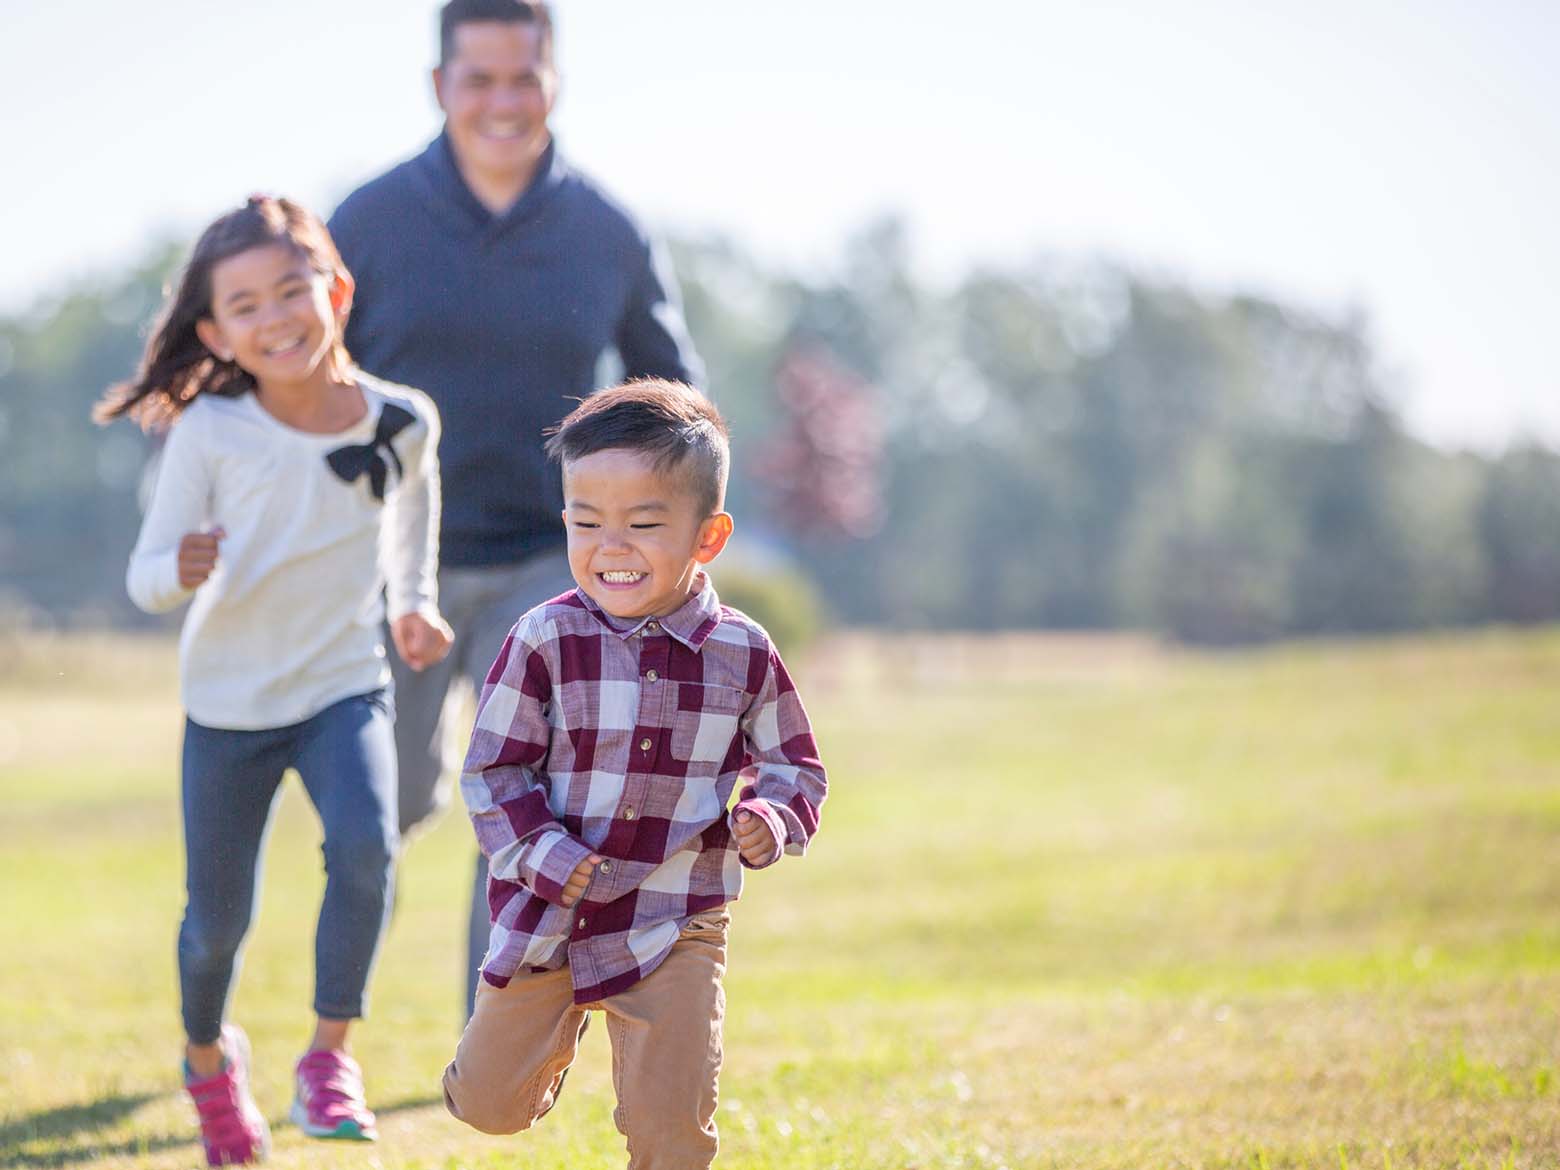 A man and his two young children run in a field while laughing